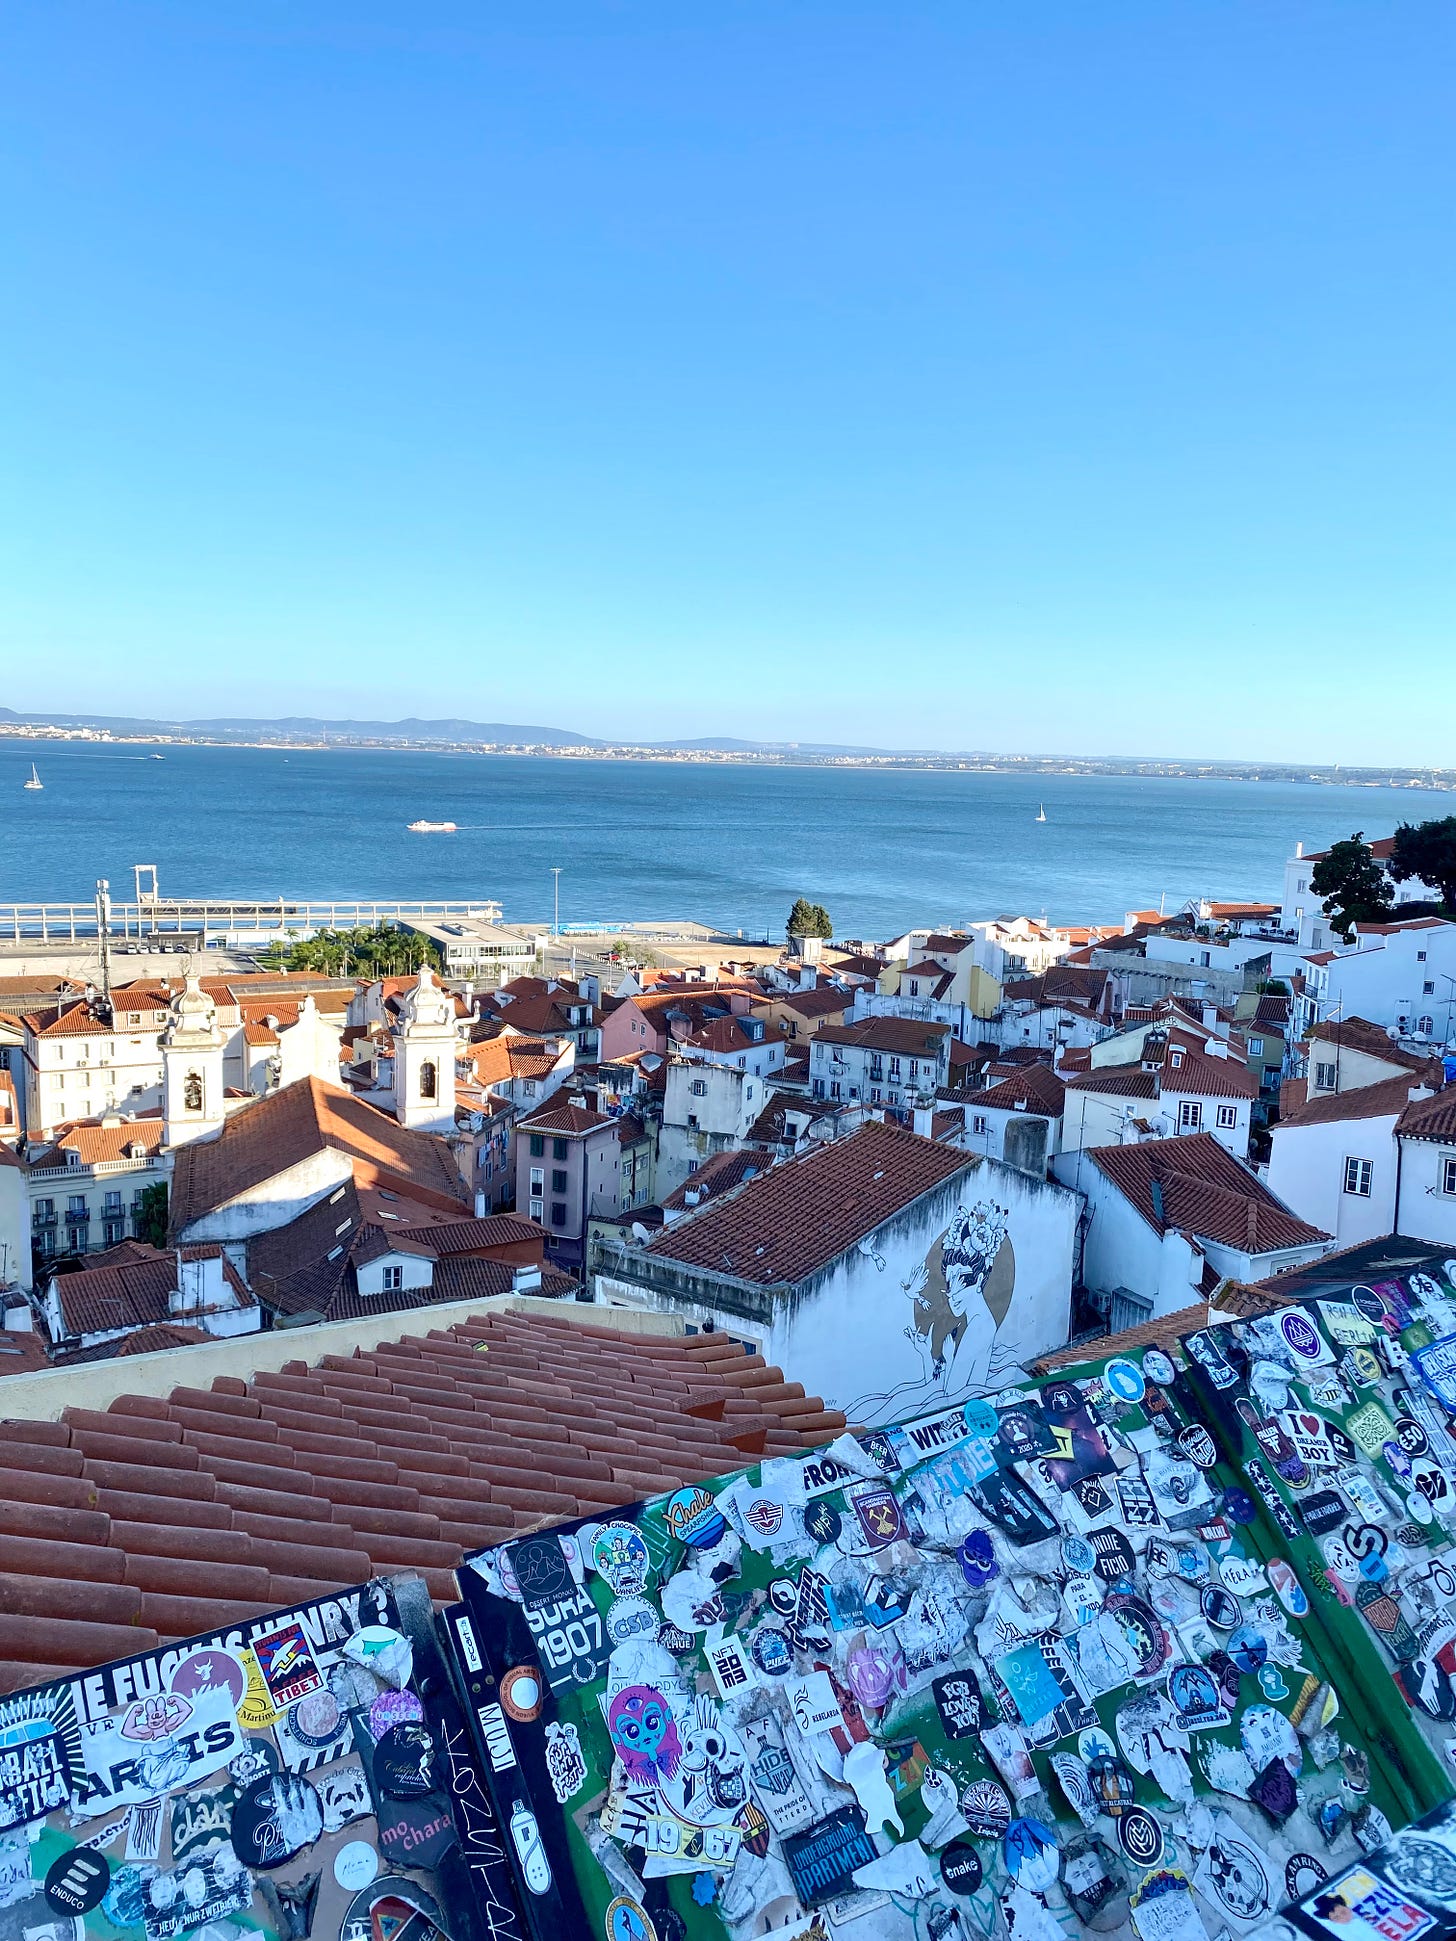 Looking out to the River Teju from the city of Lisbon, Portugal